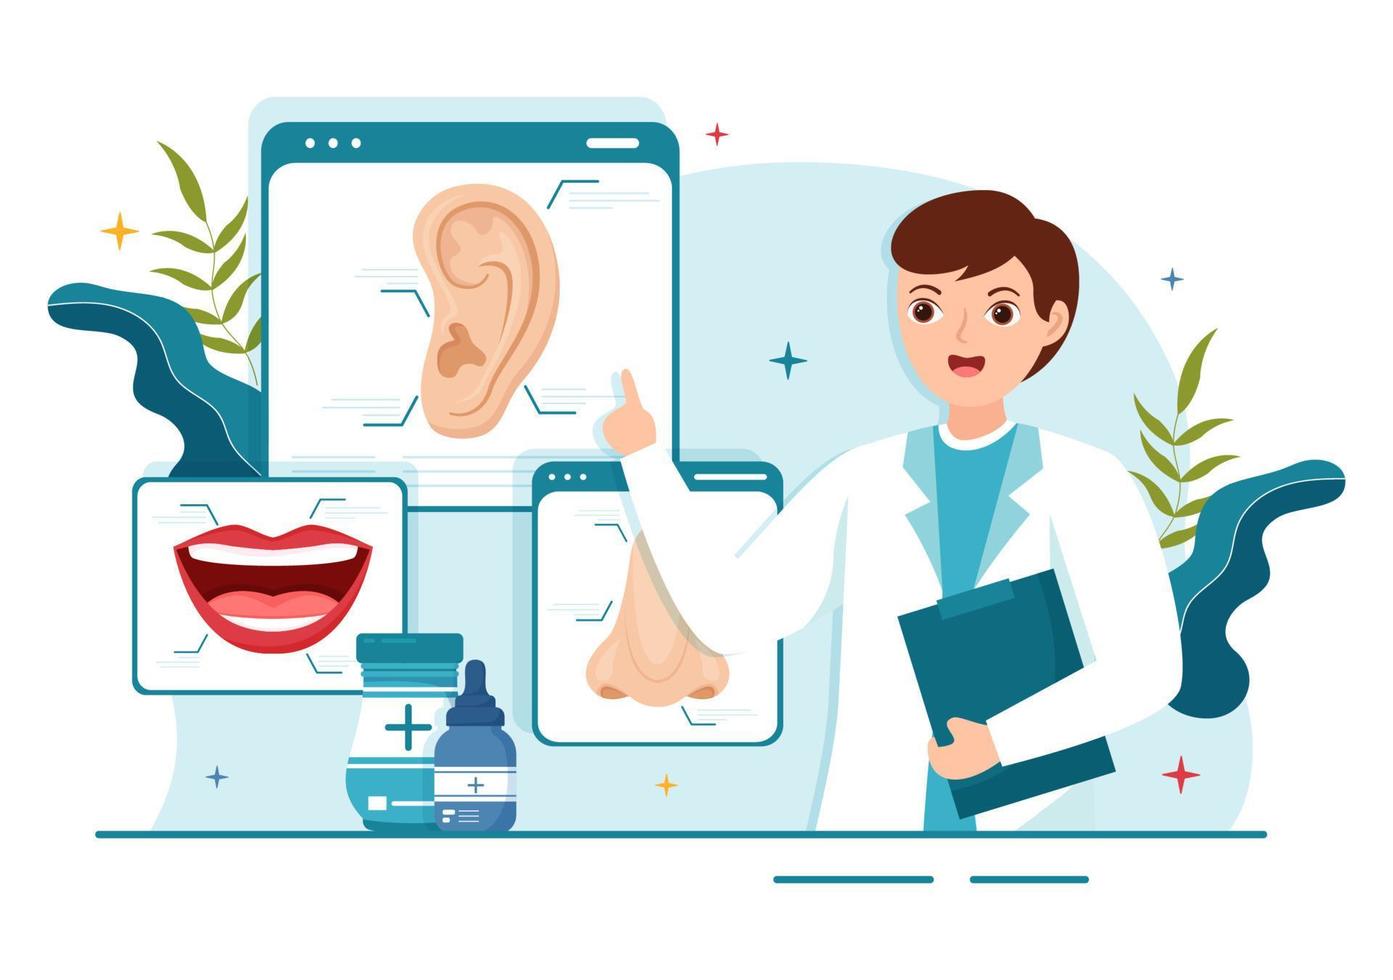 Otorhinolaryngologist Illustration with Medical Relating to the Ear, Nose and Throat in Healthcare Flat Cartoon Hand Drawn Landing Page Templates vector